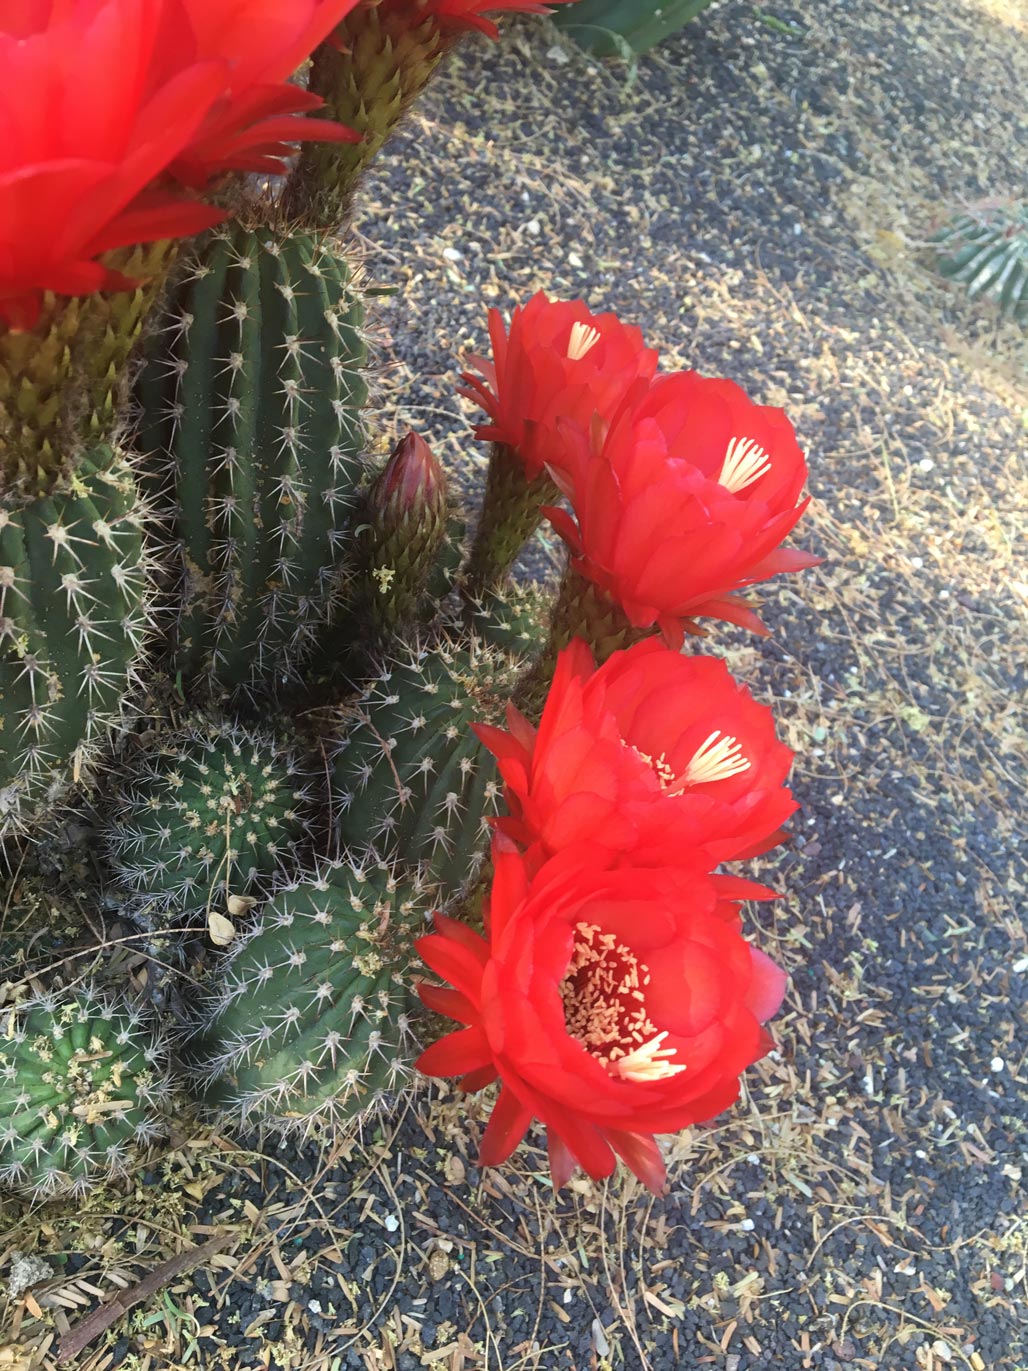 Several bright red Torch Cactus flowers bloom.